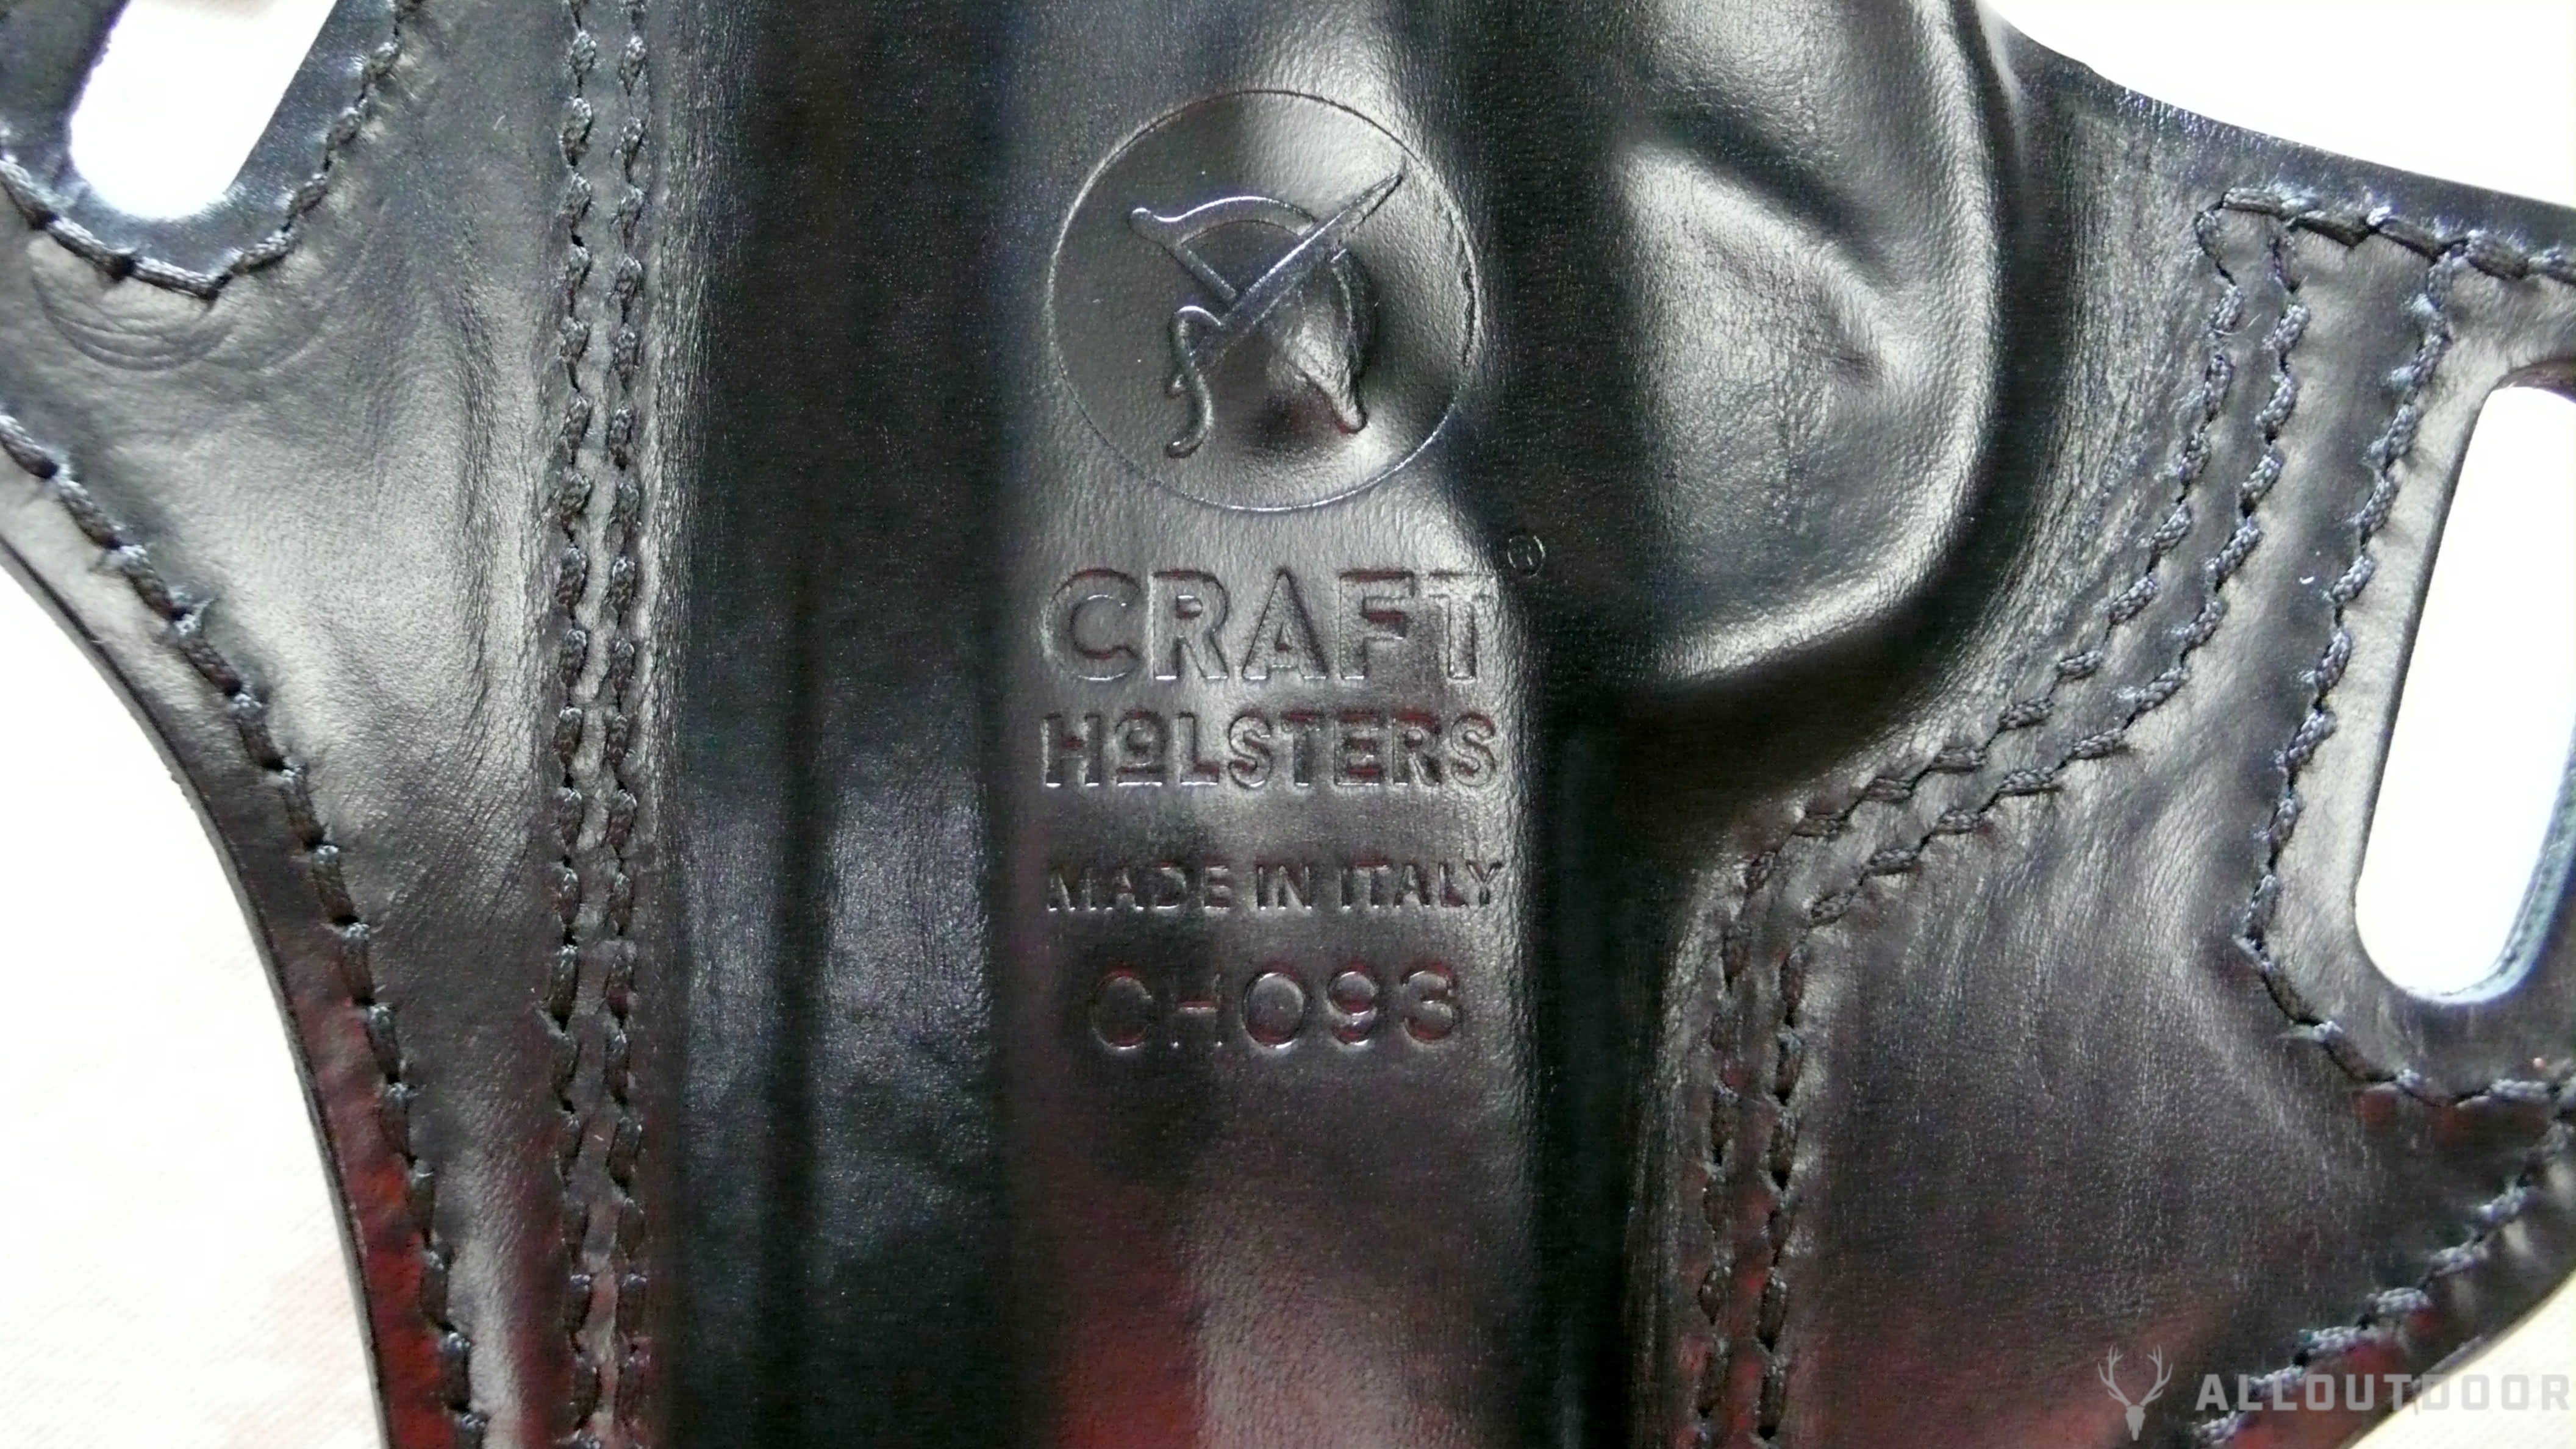 AllOutdoor Review: Craft Holsters, OWB Panther Holster